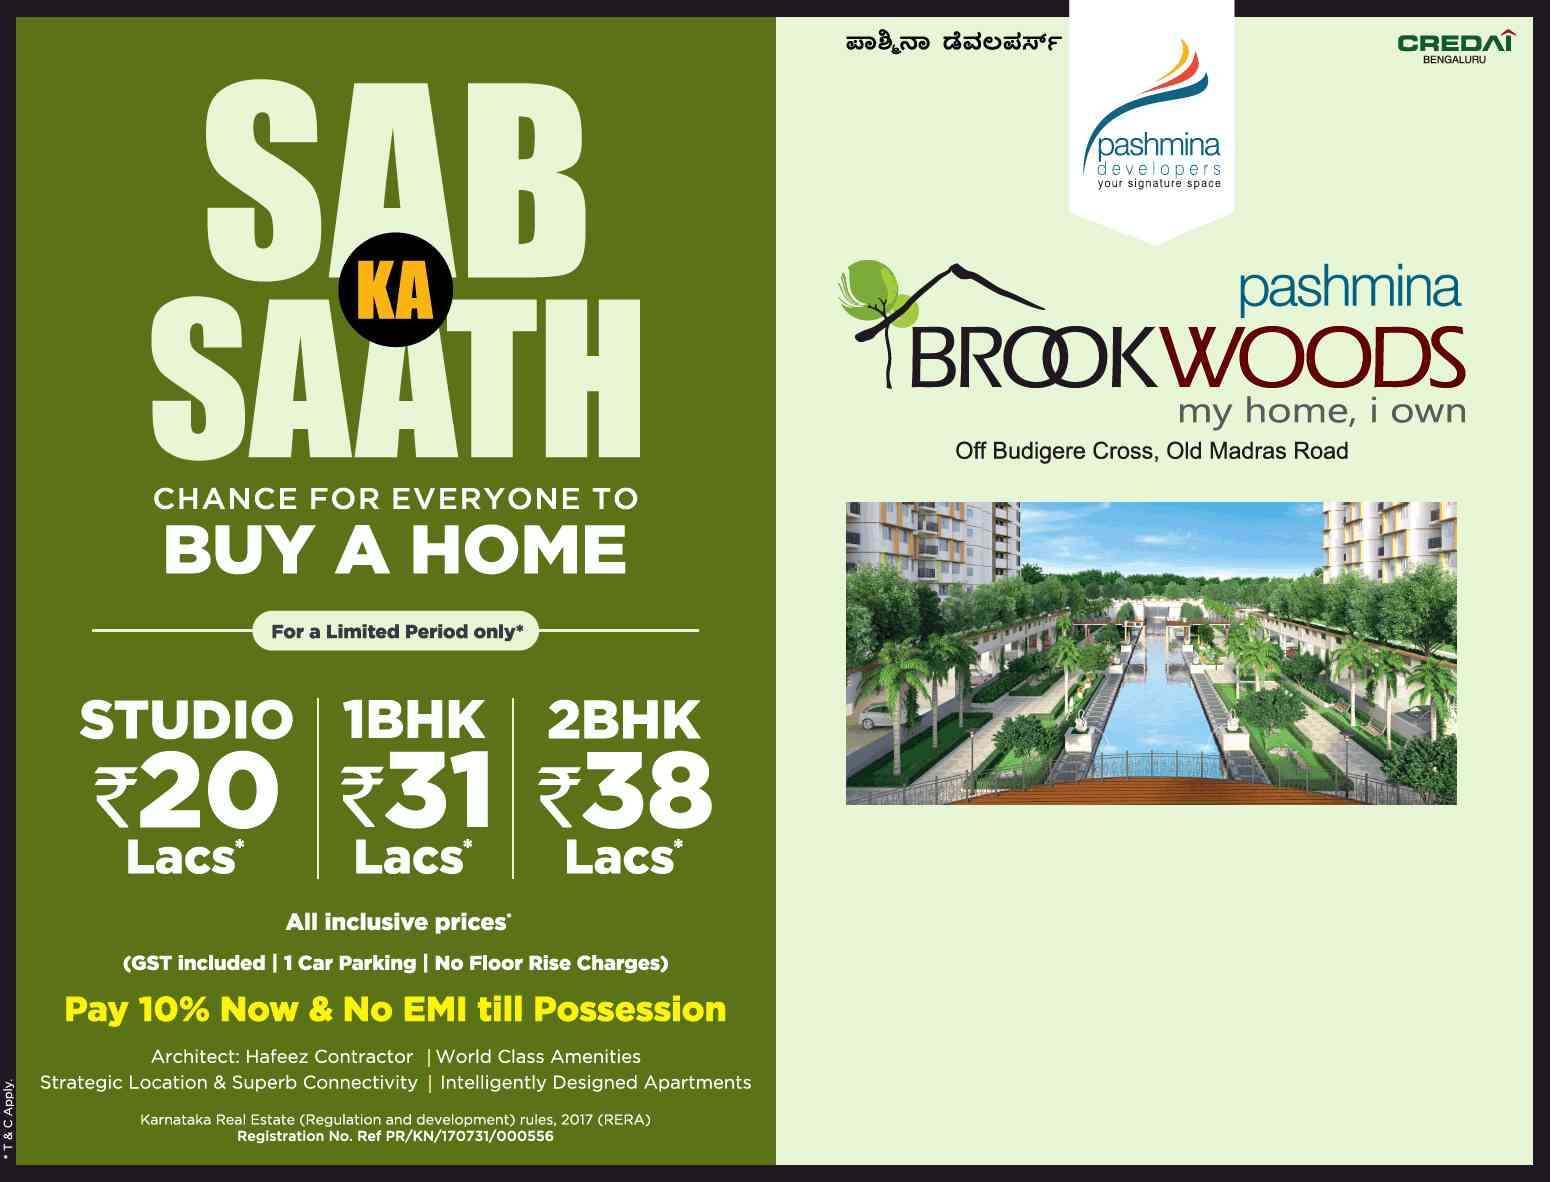 Pay 10% now and no EMI till possession at Pashmina Brookwoods in Bangalore Update